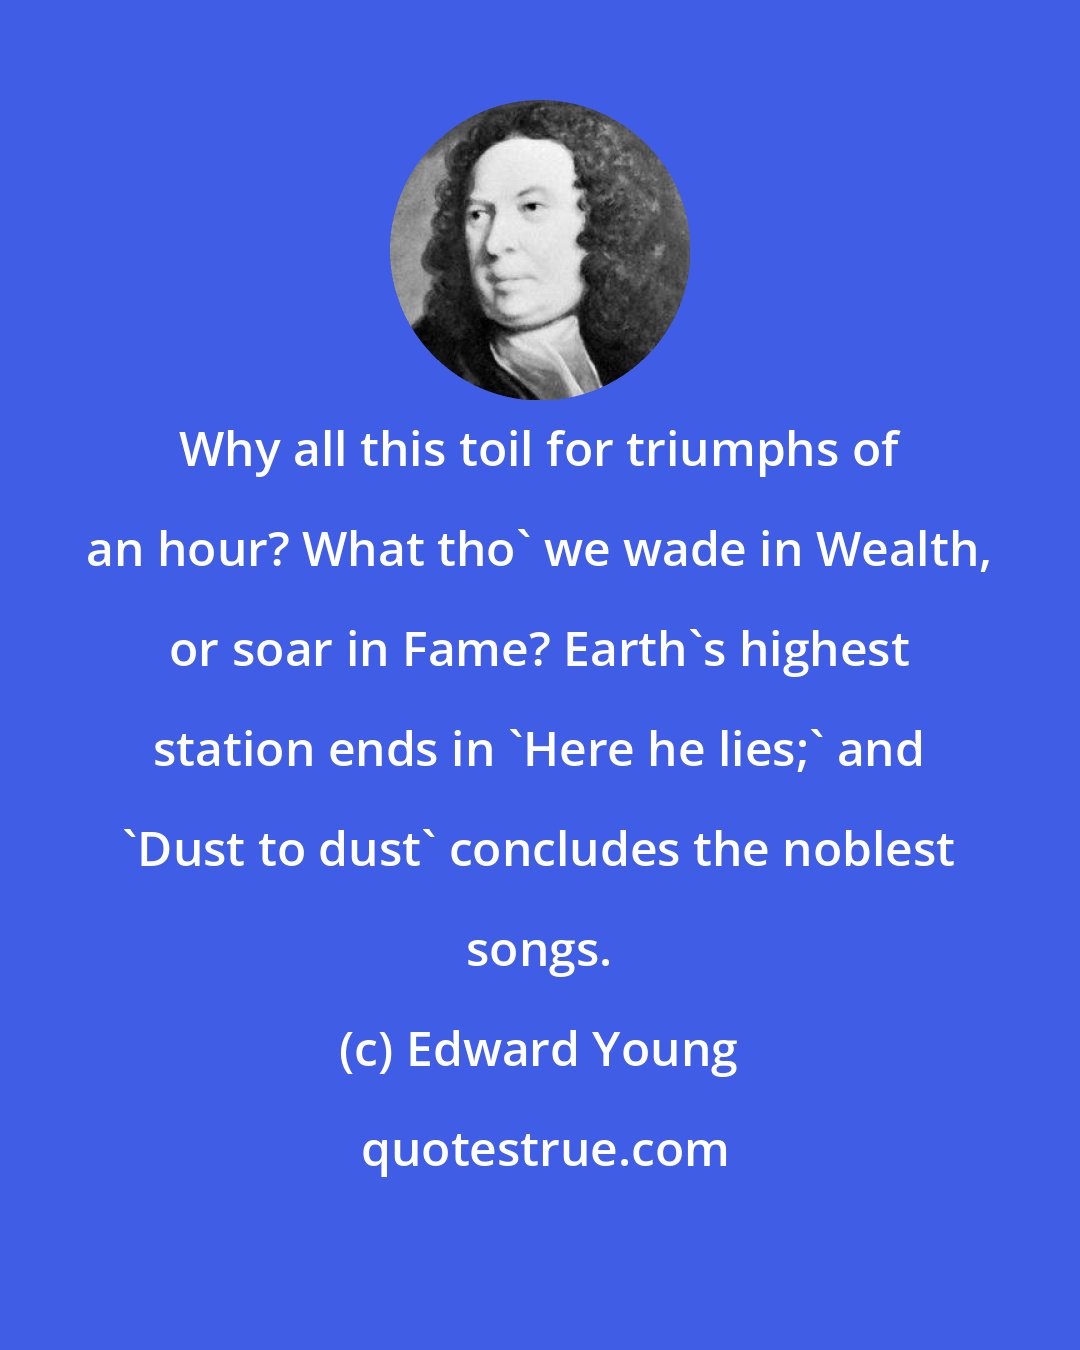 Edward Young: Why all this toil for triumphs of an hour? What tho' we wade in Wealth, or soar in Fame? Earth's highest station ends in 'Here he lies;' and 'Dust to dust' concludes the noblest songs.